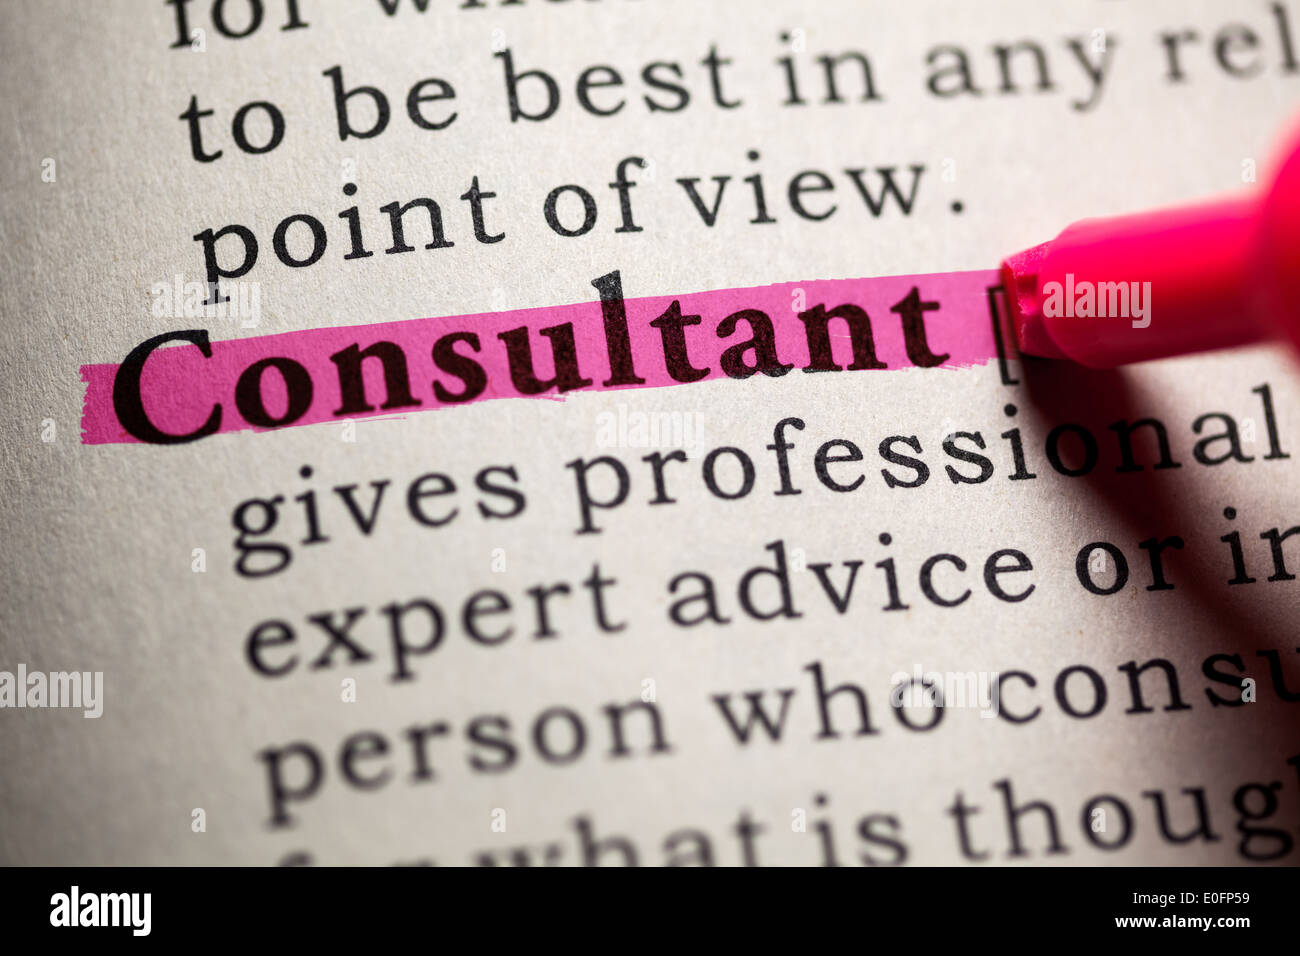 Fake Dictionary, Dictionary definition of the word consultant. Stock Photo